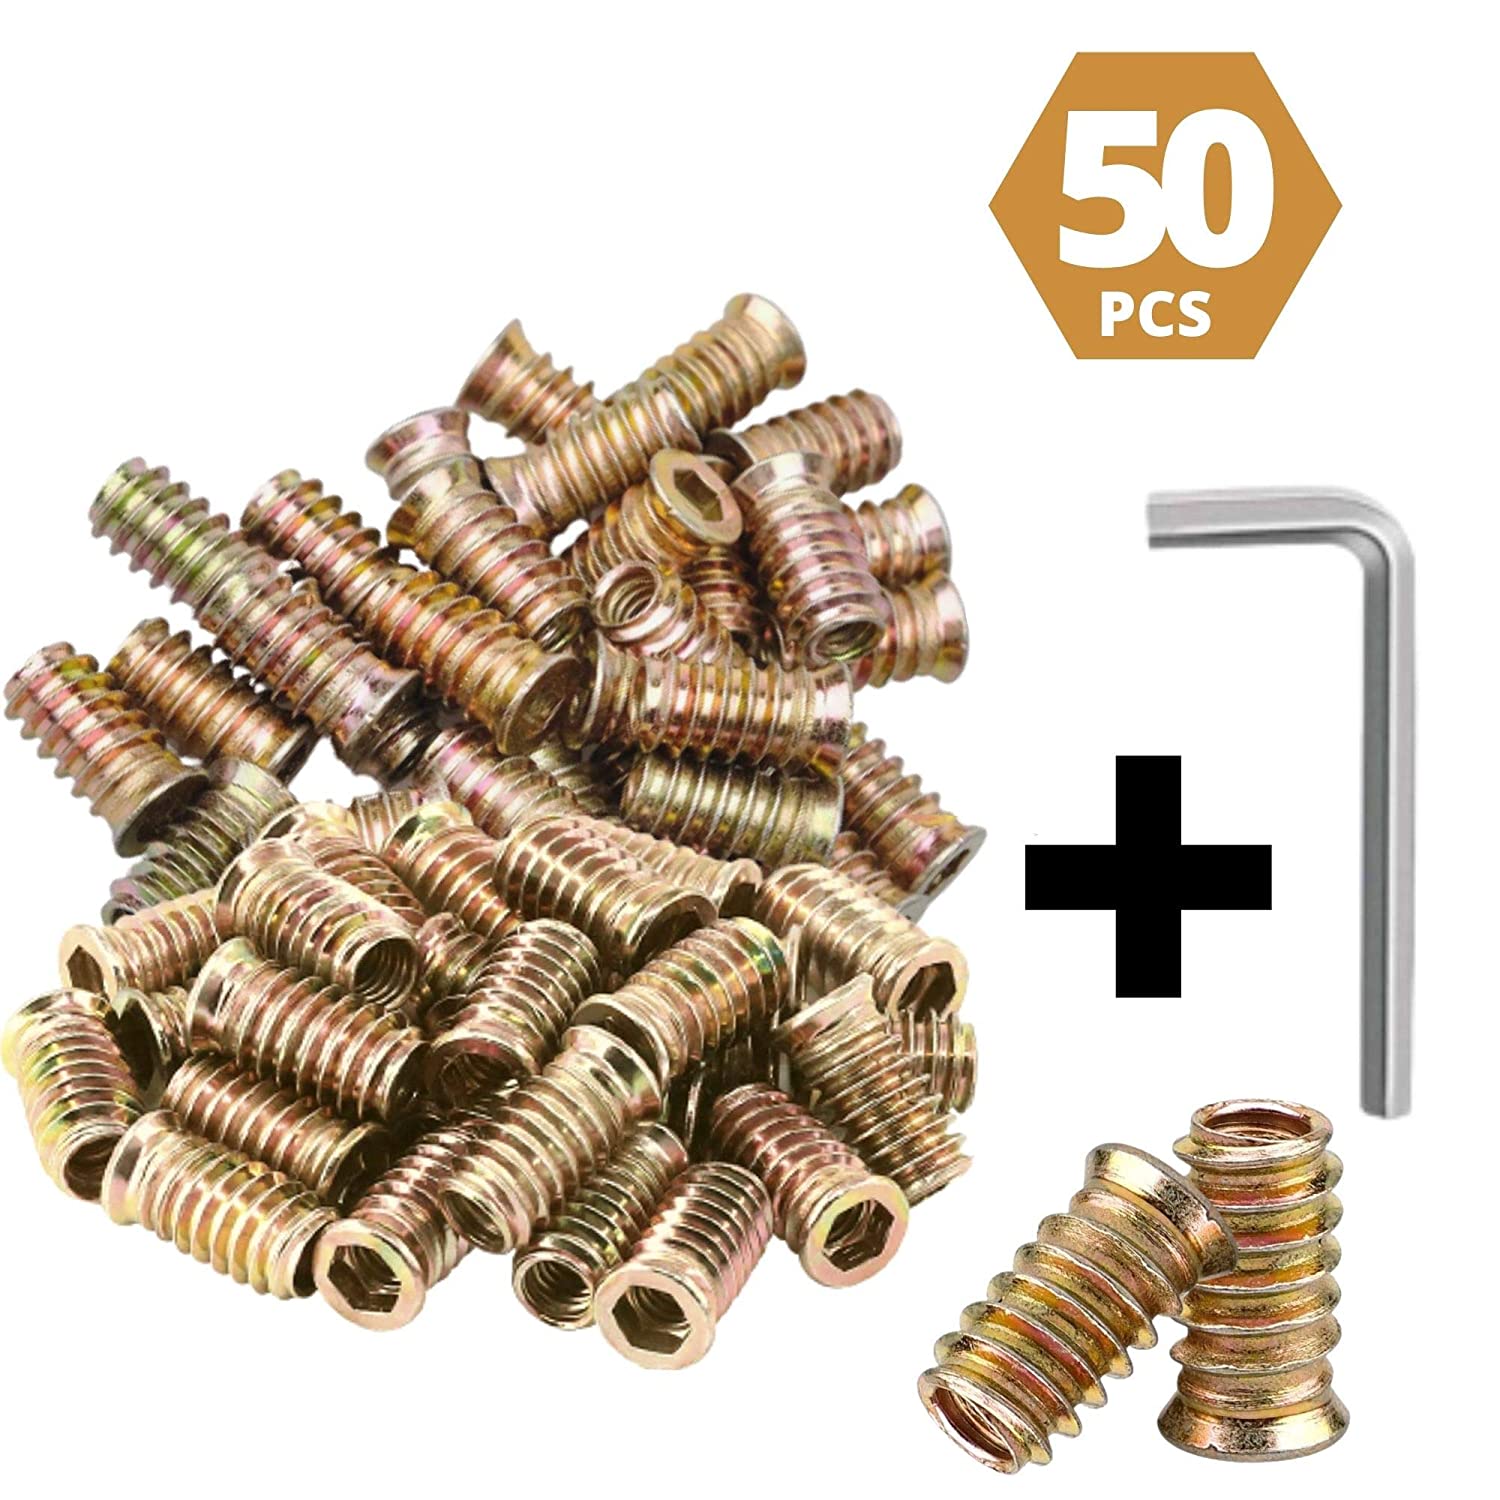 1/4 inch -20 x15mm 15mm Furniture Screws Threaded with Hex Socket, Zinc Plated with One Allen Wrench - 50 Pc